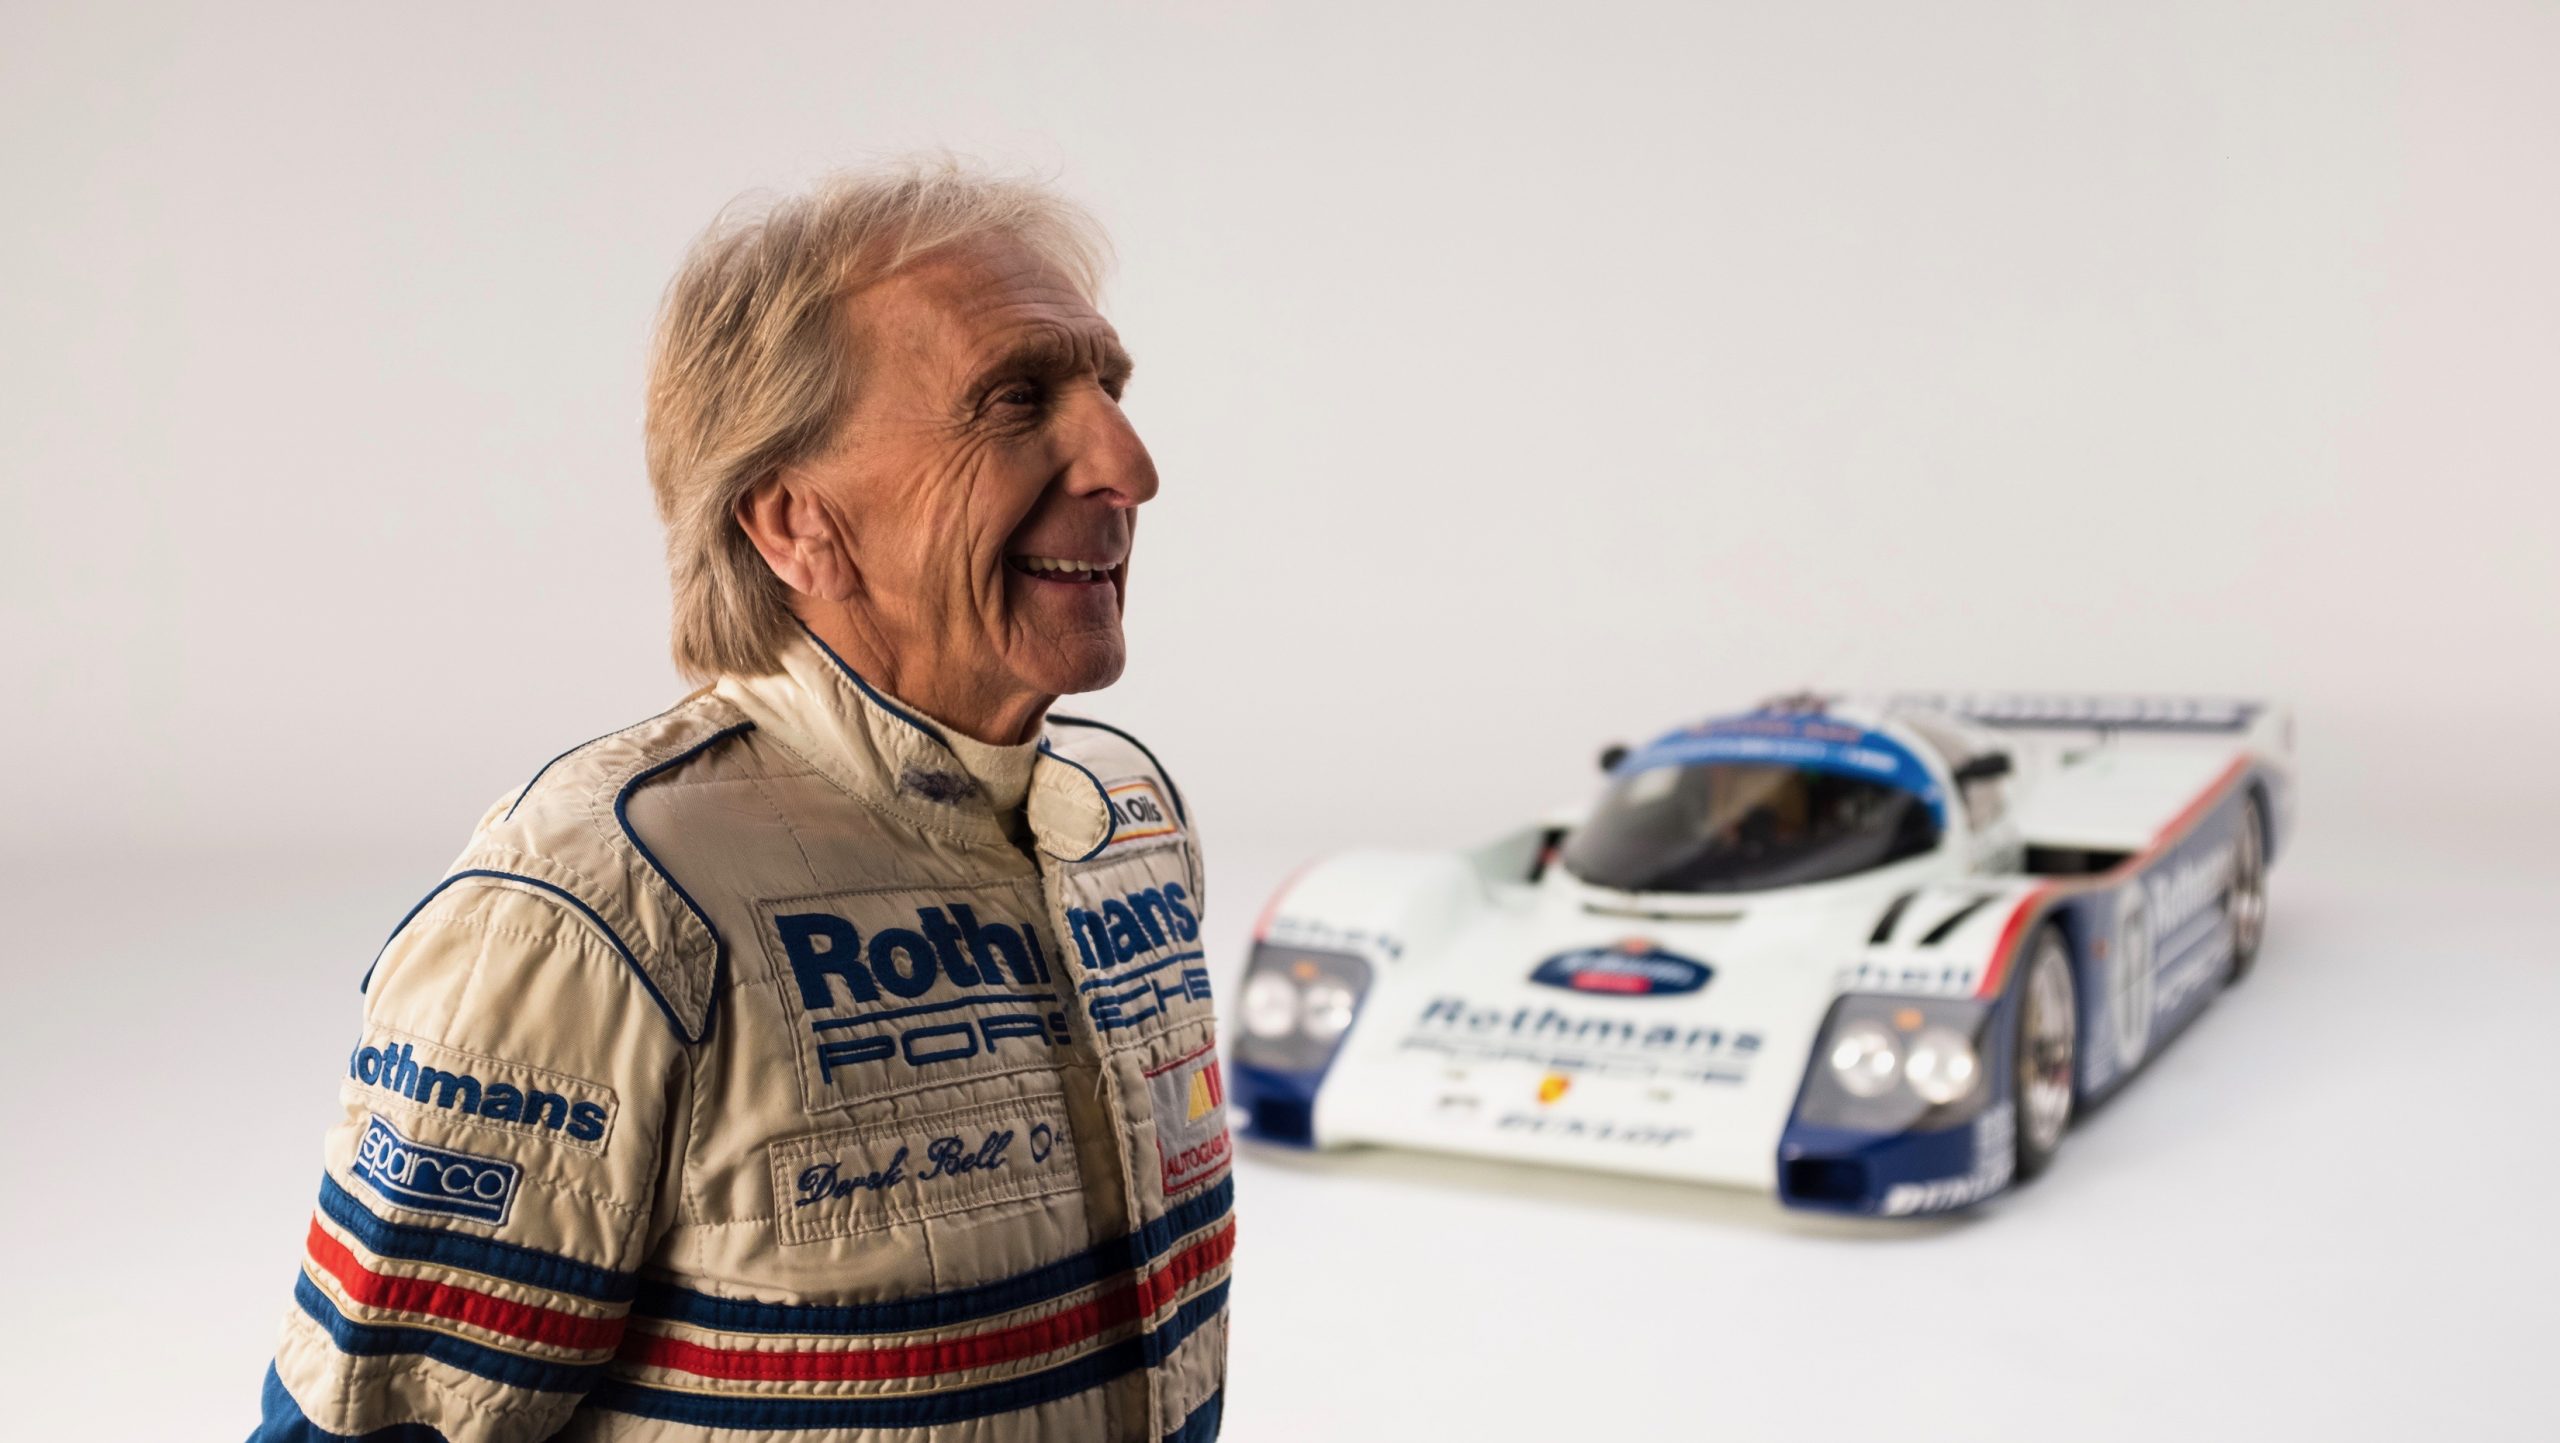 'We are never wrong': Derek Bell on how Porsche created the world-beating 956 Group C car